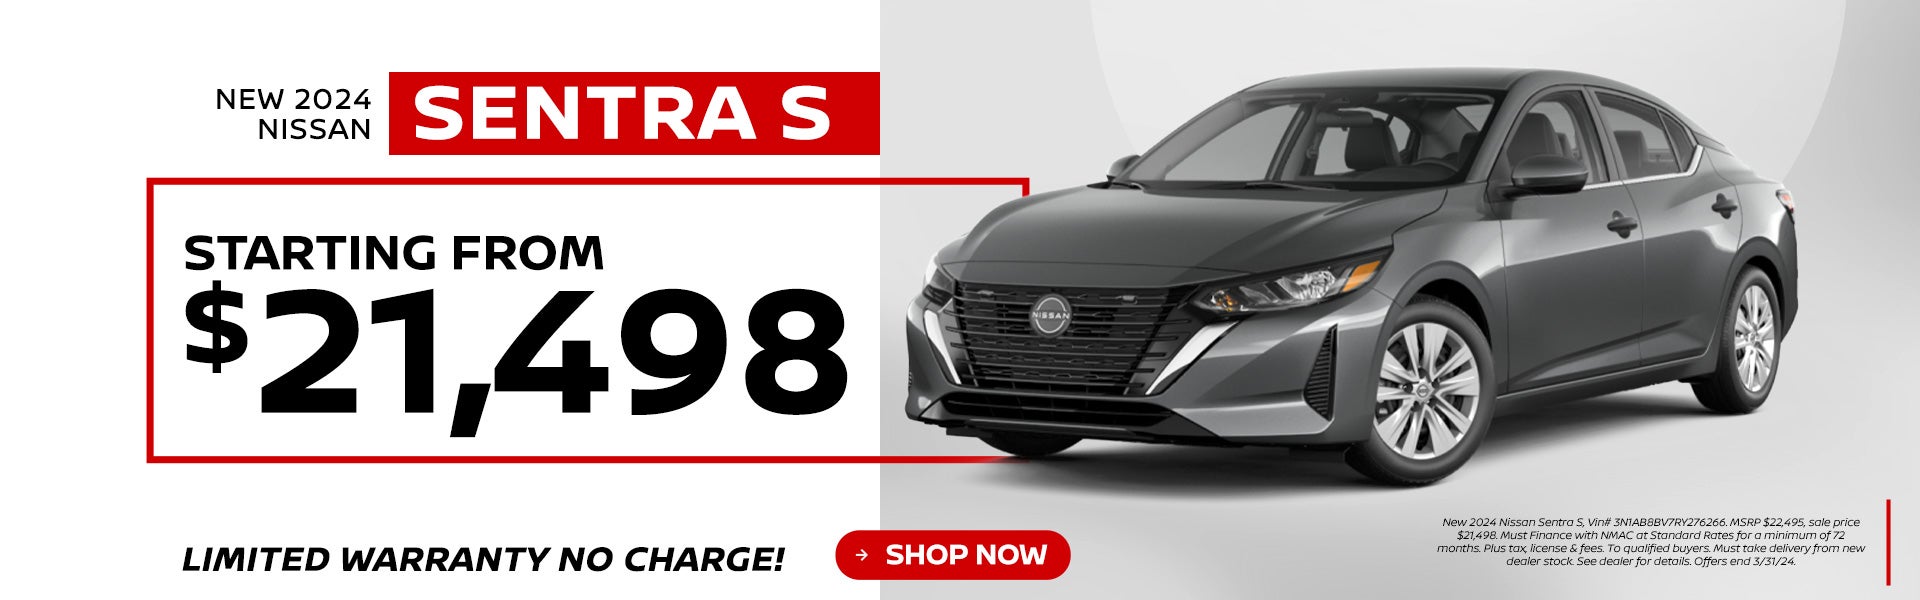 New 2024 Sentra starting from $21,498